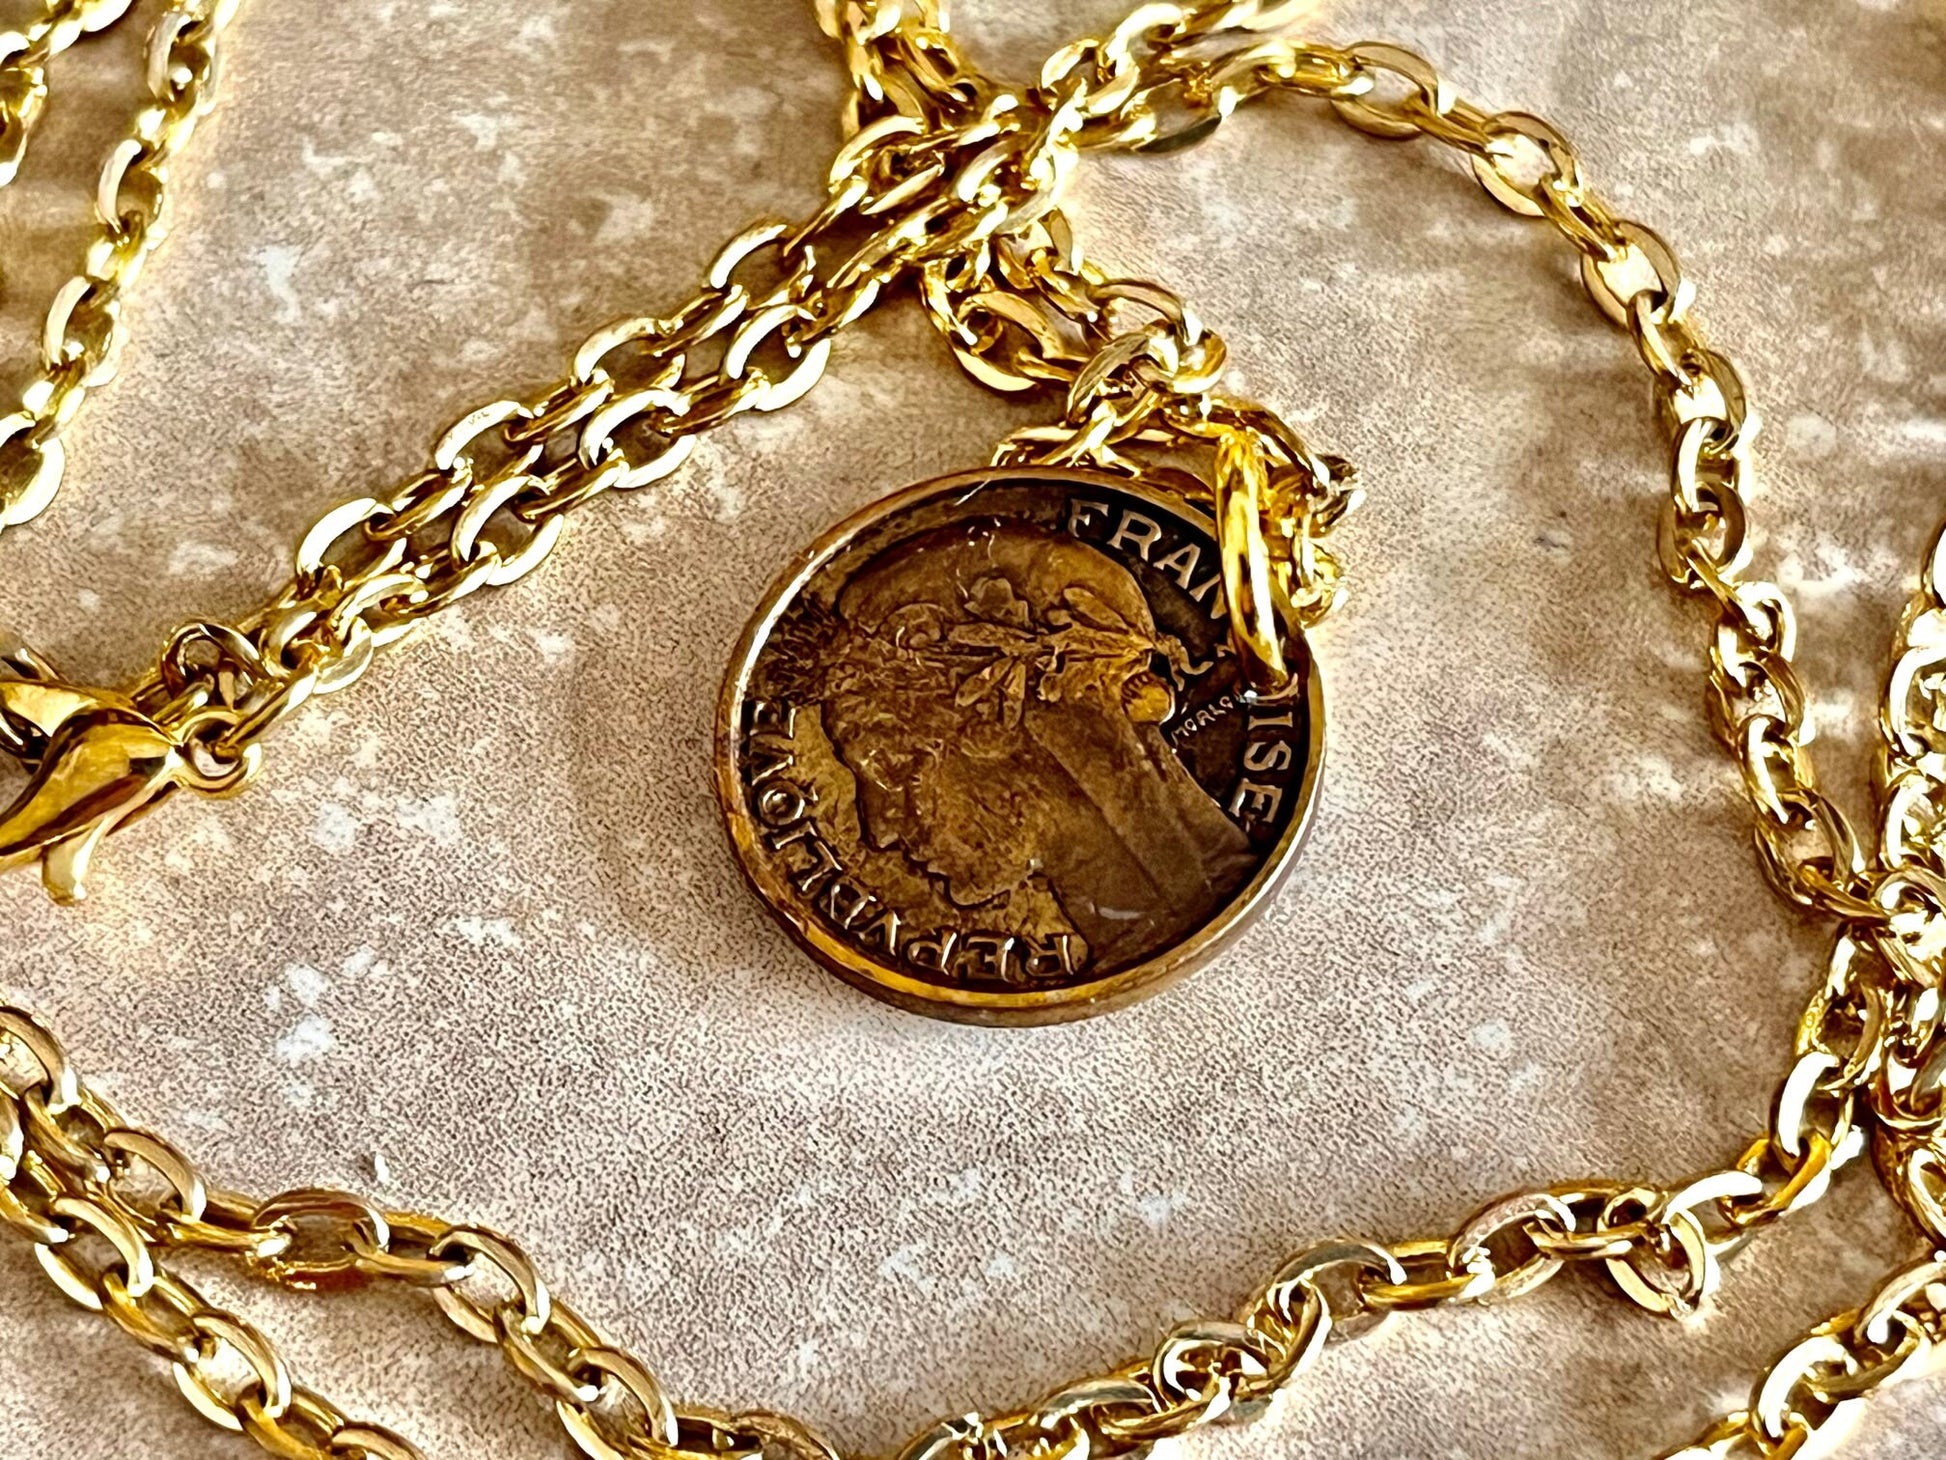 France Coin Necklace French Pendant 50 Centimes Liberty Equality Fraternity Personal Jewelry Gift Friend Charm Him Her World Coin Collector